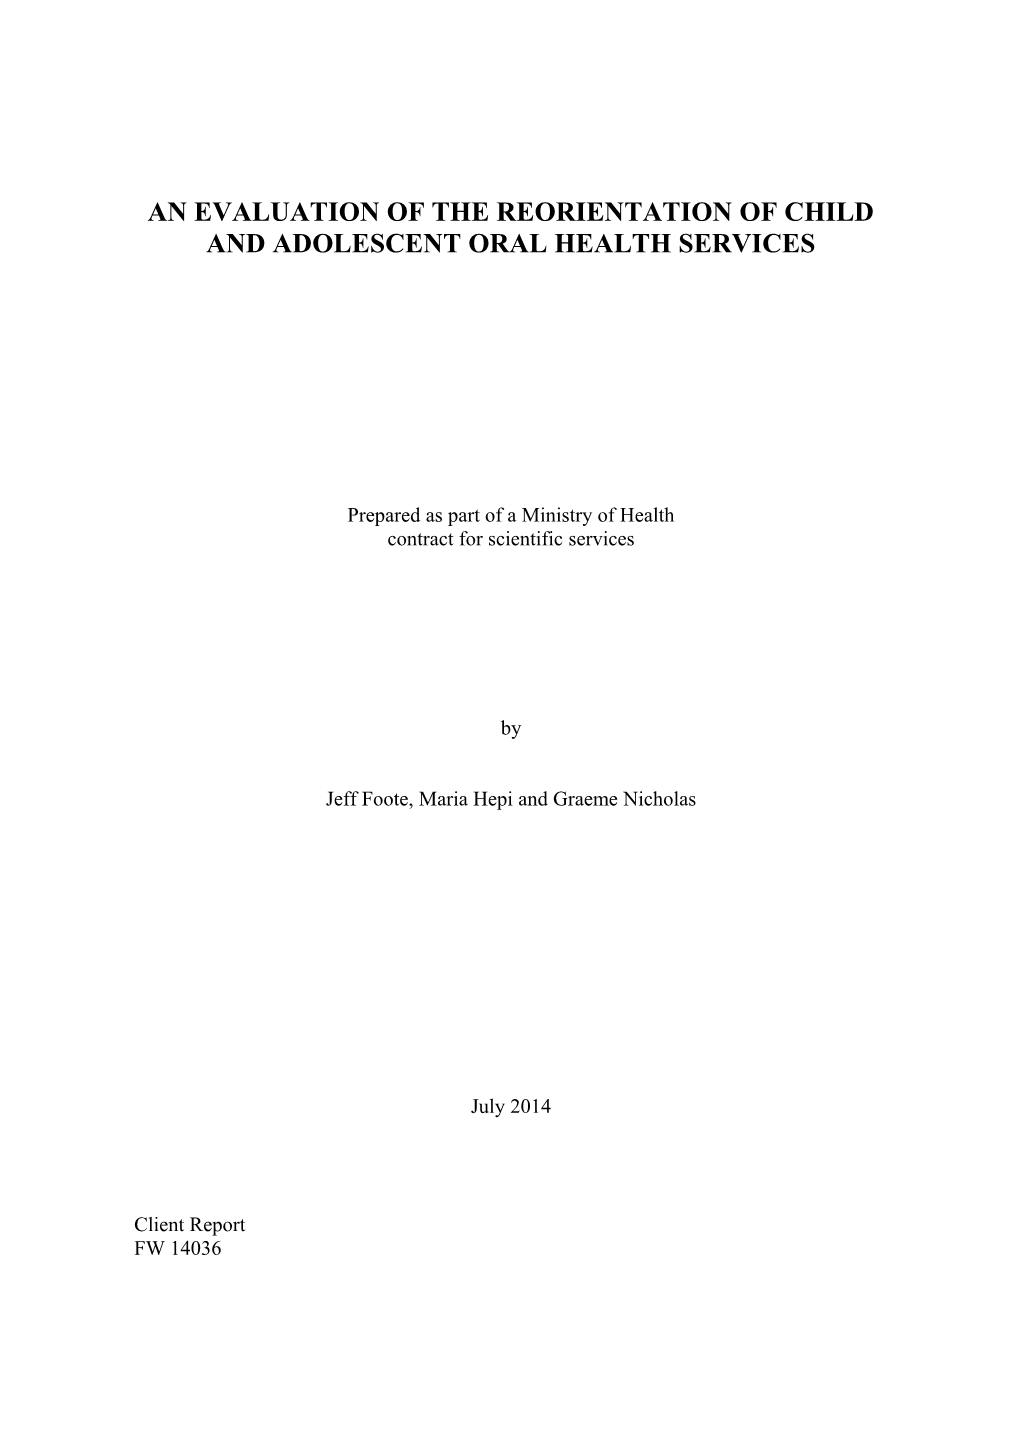 An Evaluation of the Reorientation of Child and Adolescent Oral Health Services